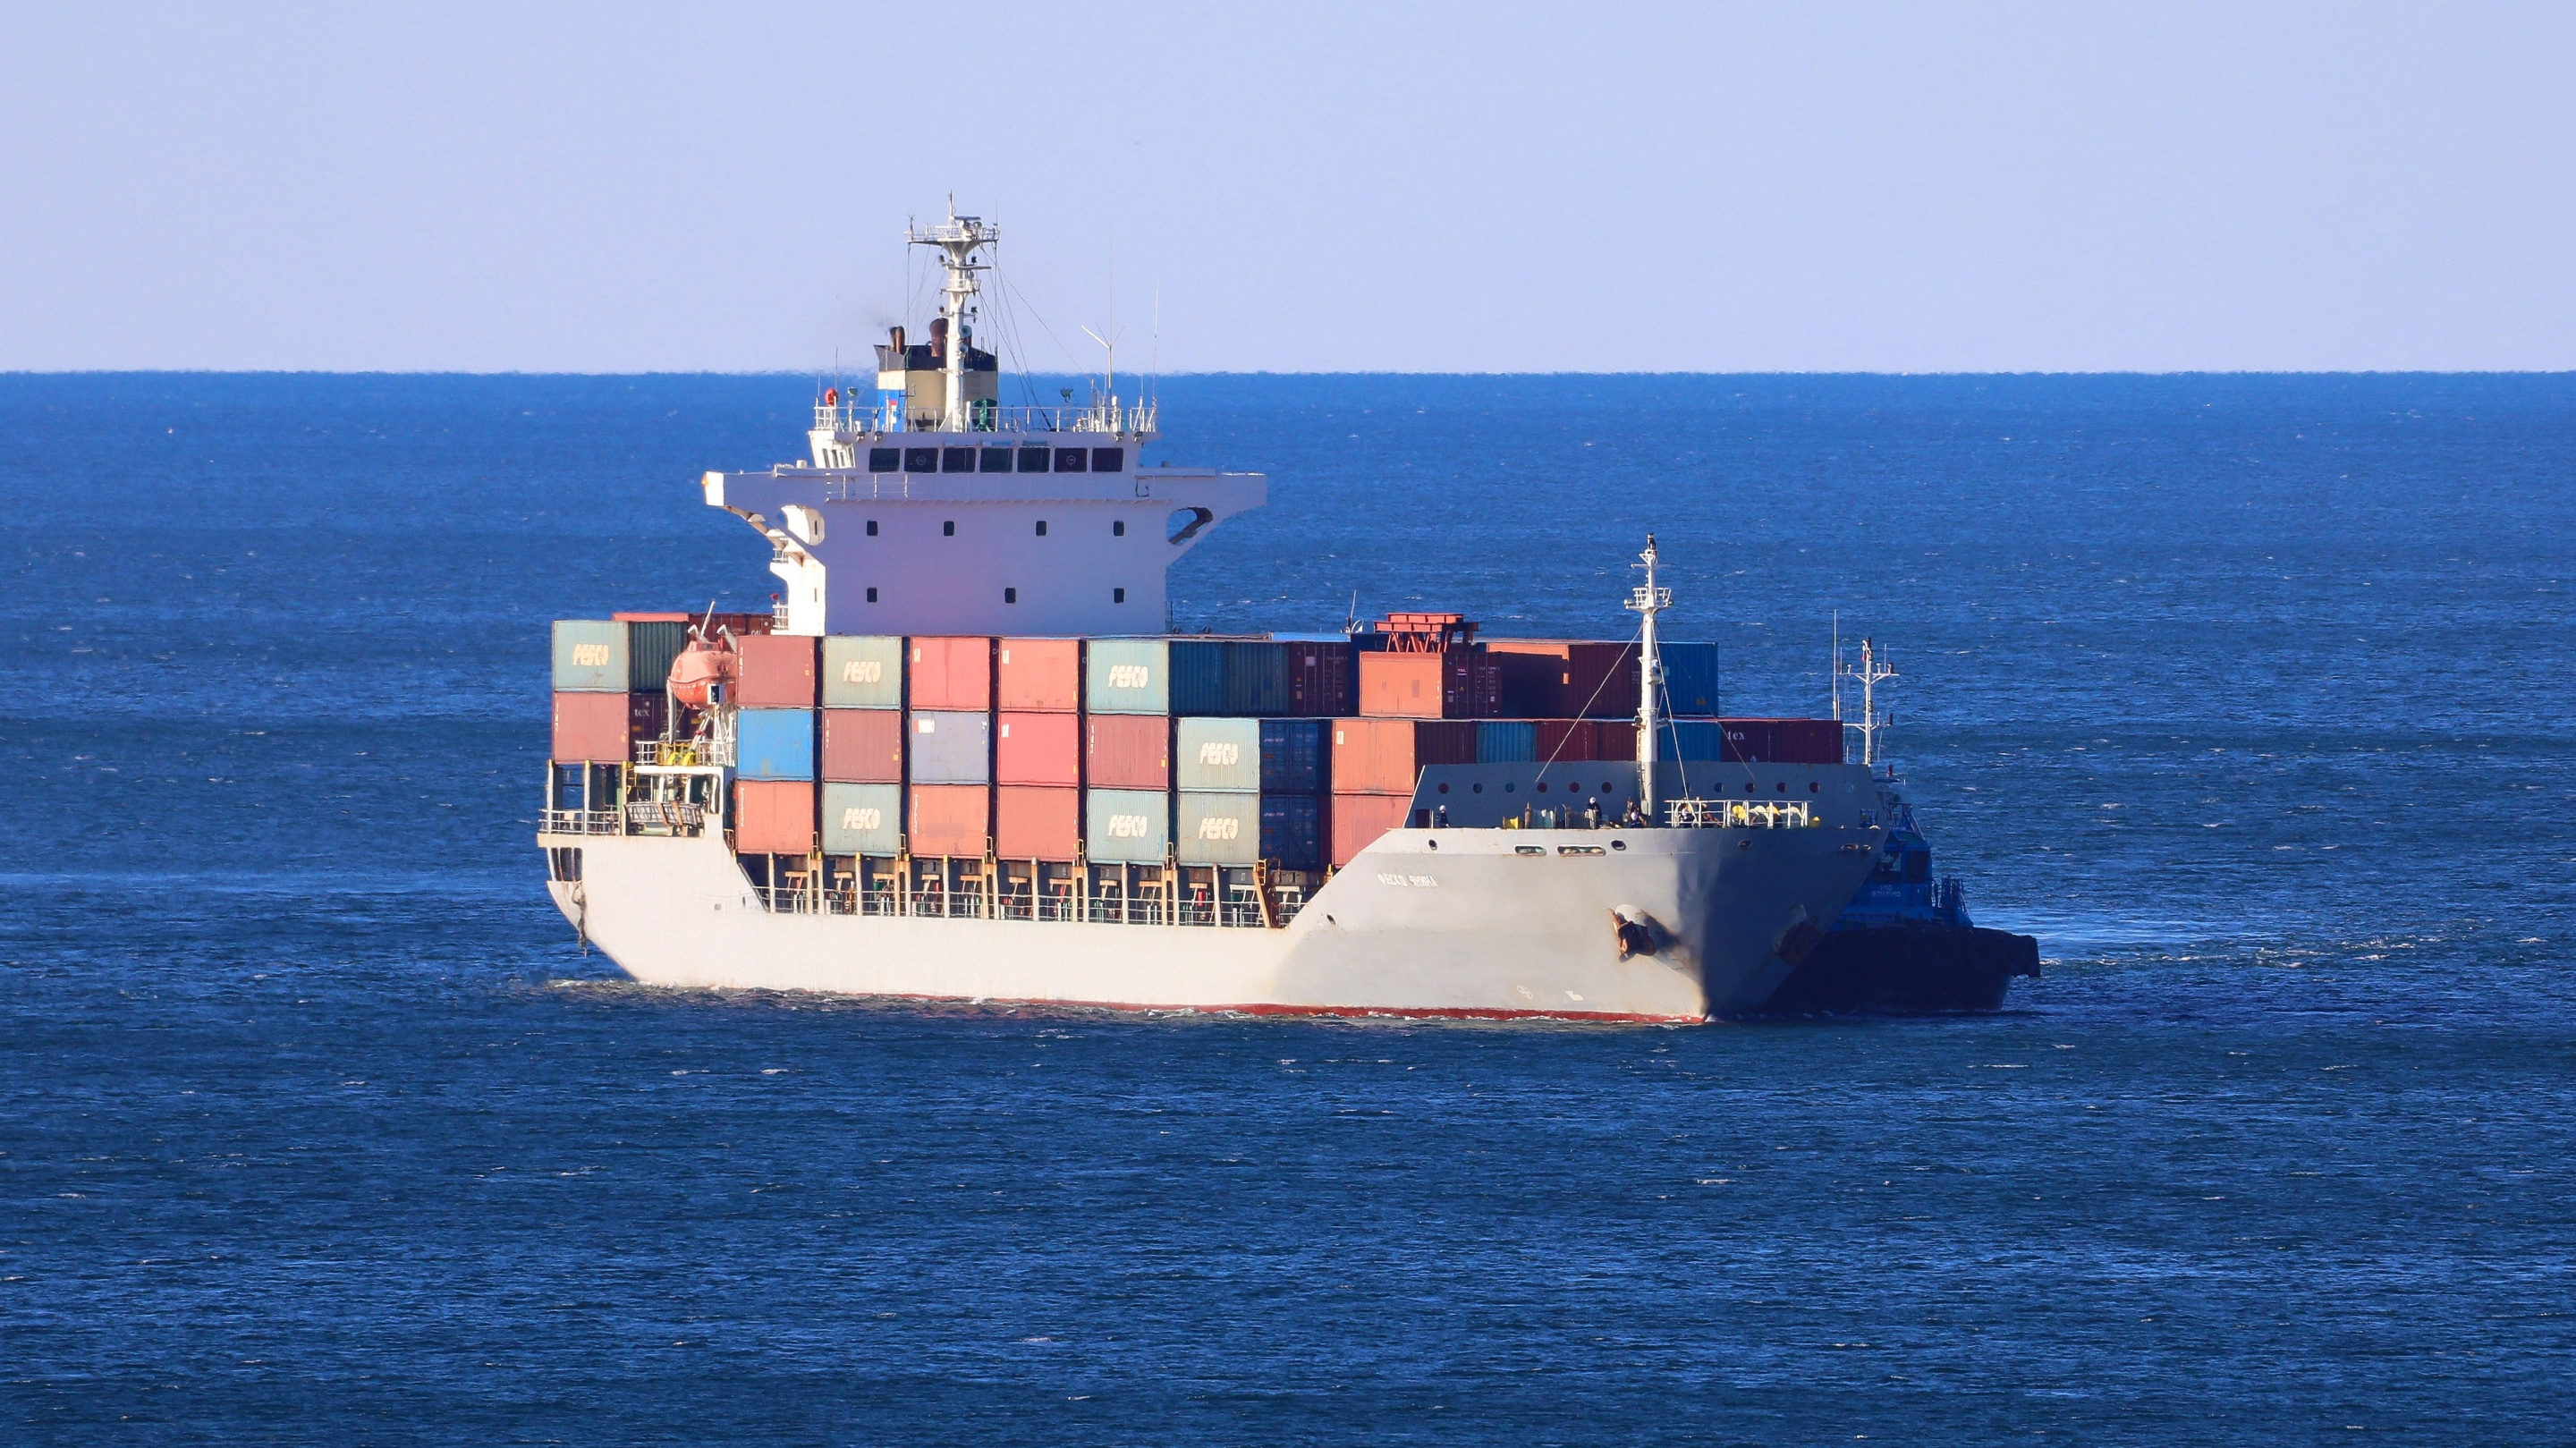 FESCO launches a new regular marine service from CPV to ports of Japan